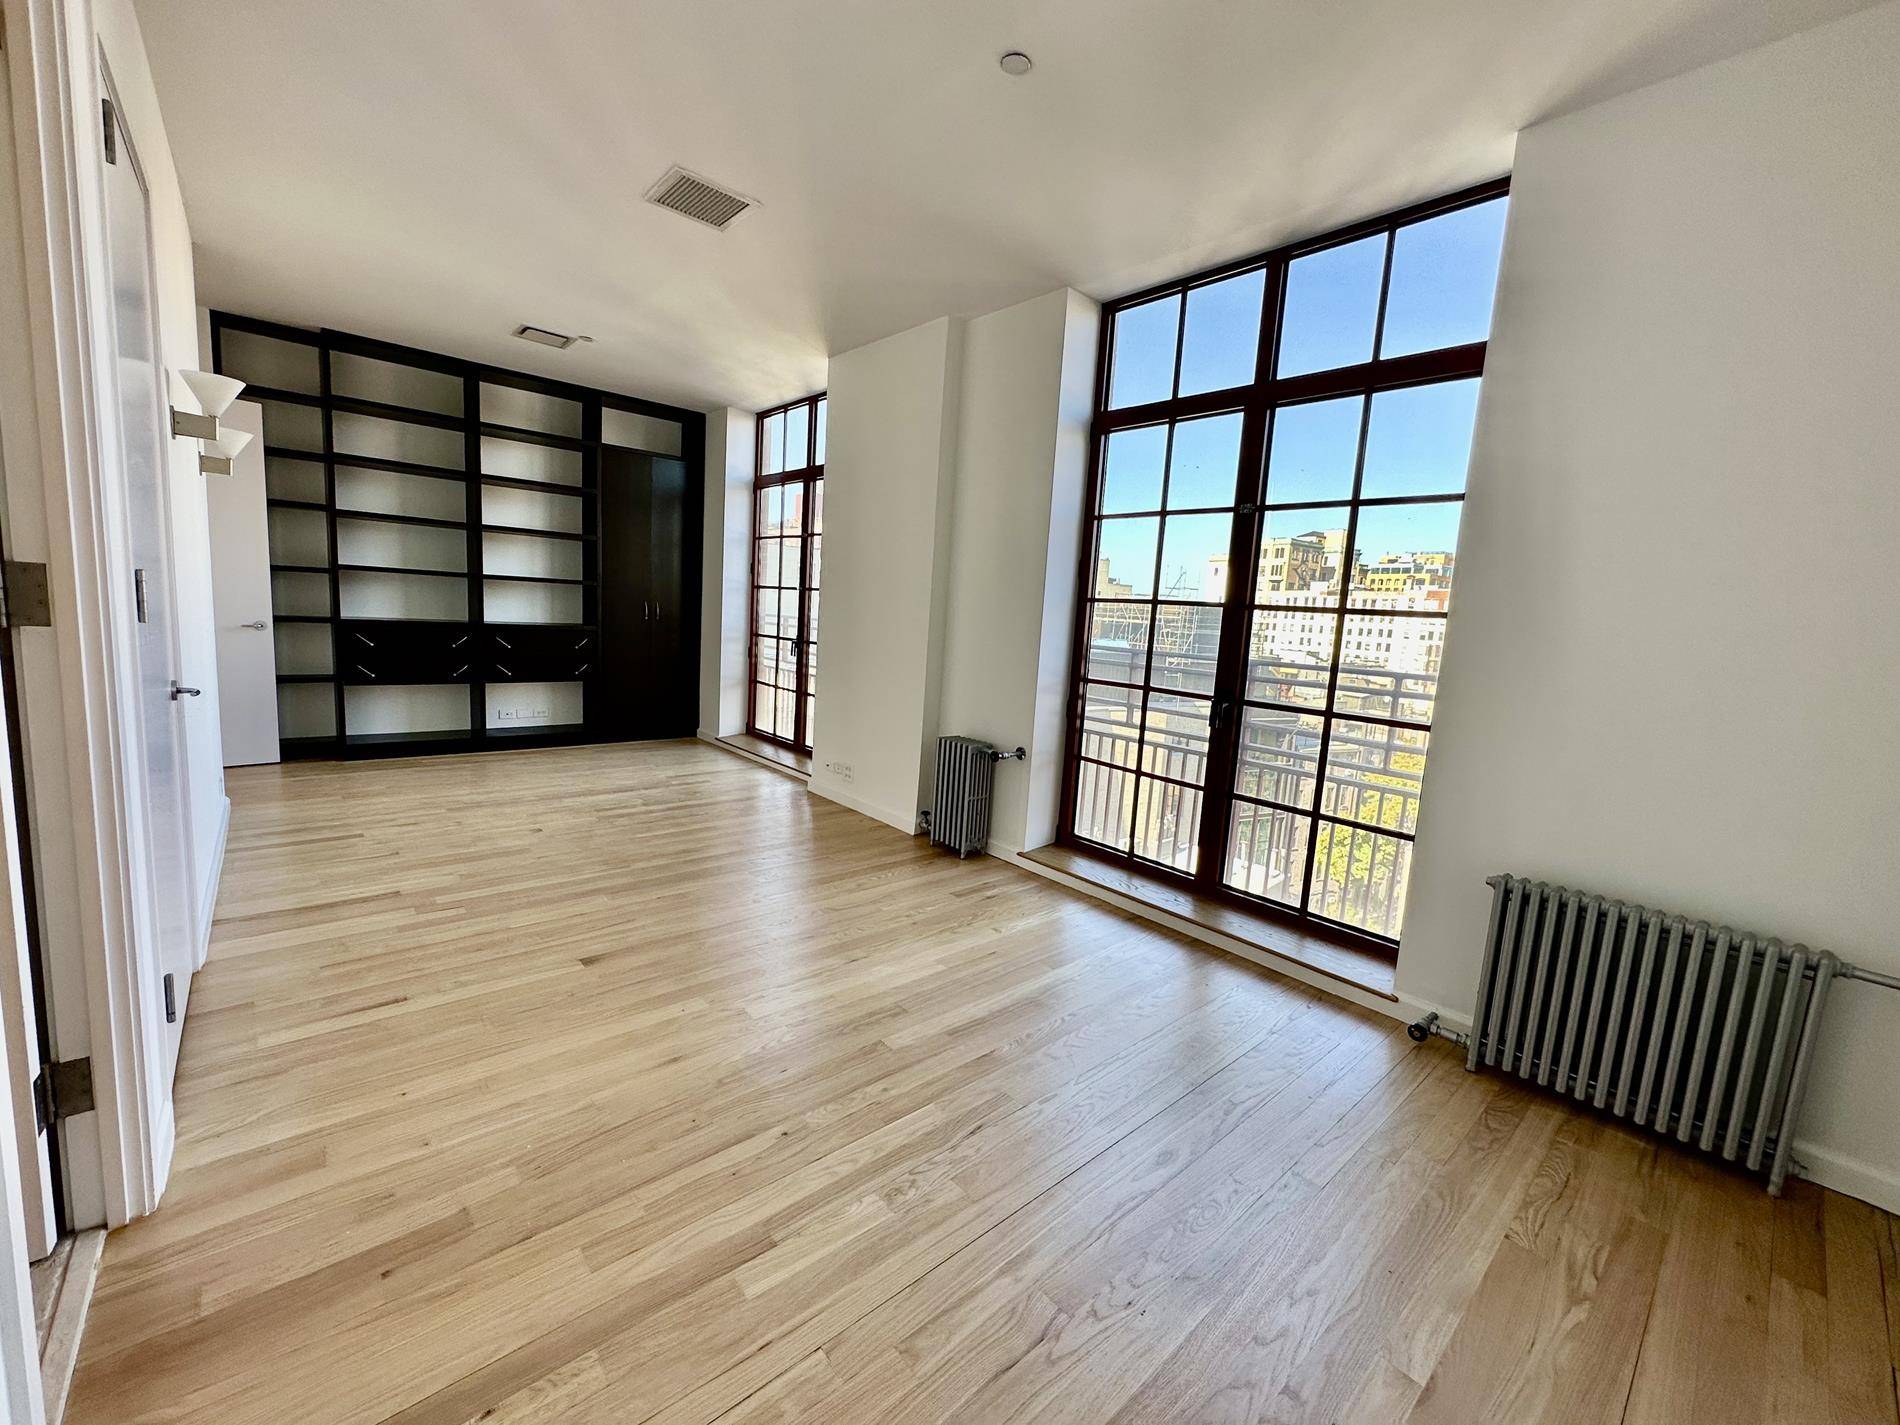 Offered for the first time, a rare sprawling sun drenched loft in a boutique building with keyed elevator access on one of the most coveted blocks in the West Village.